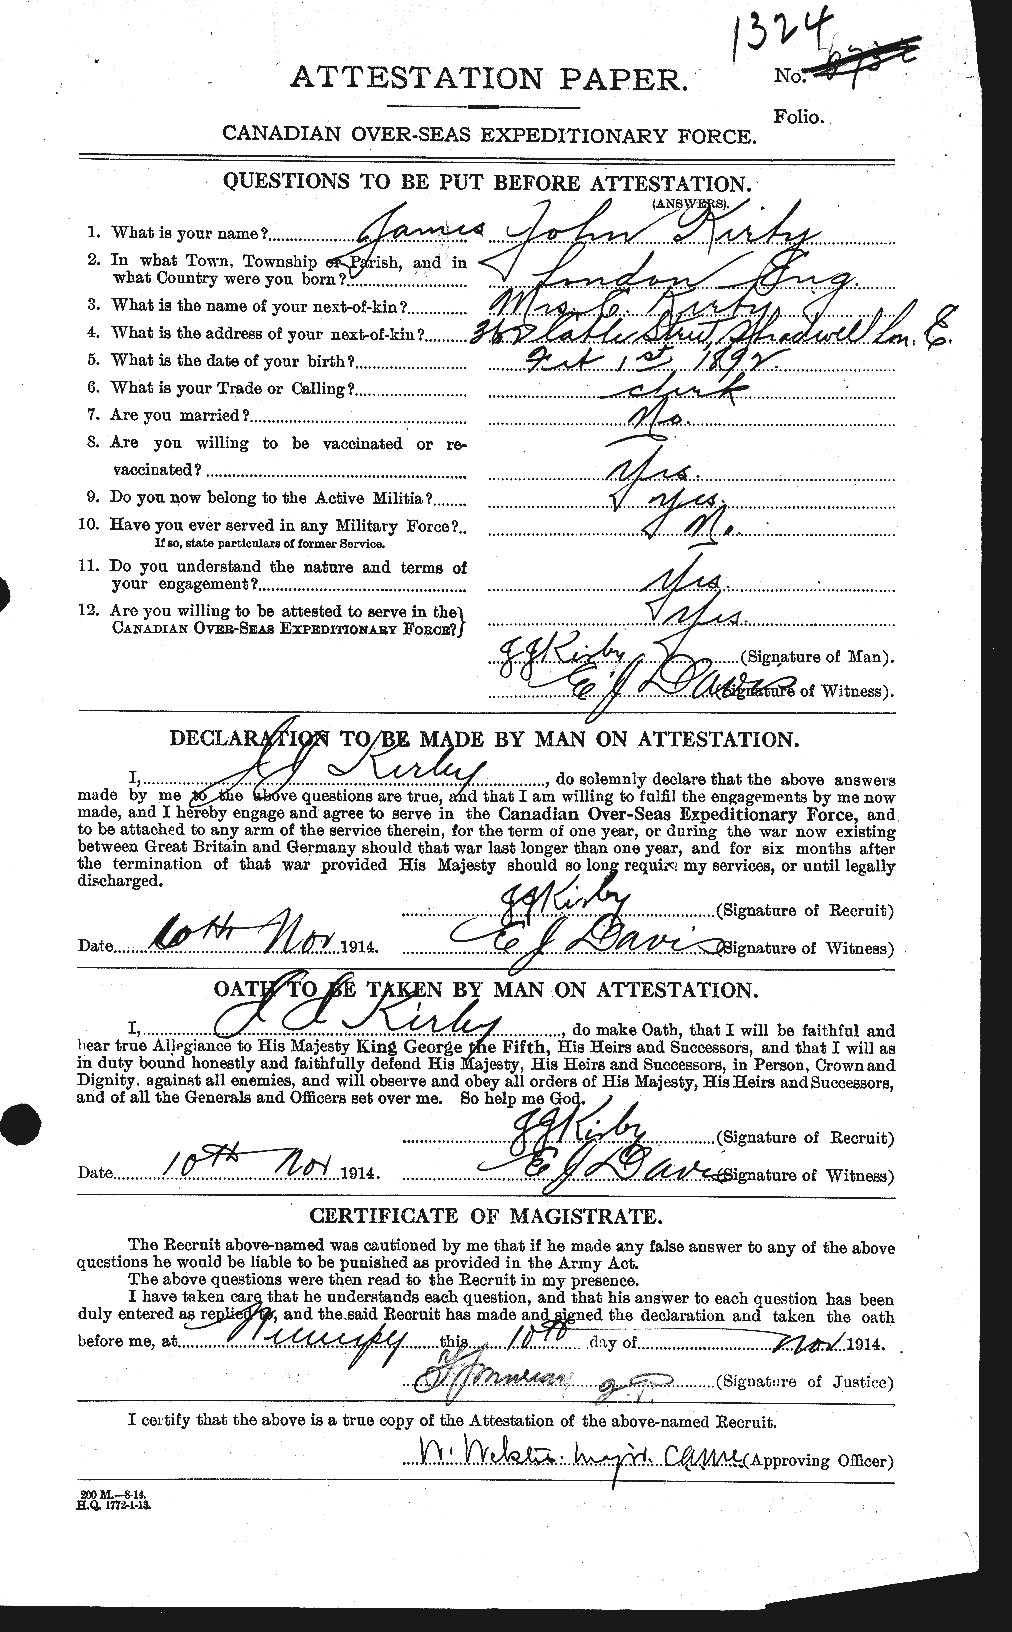 Personnel Records of the First World War - CEF 437220a